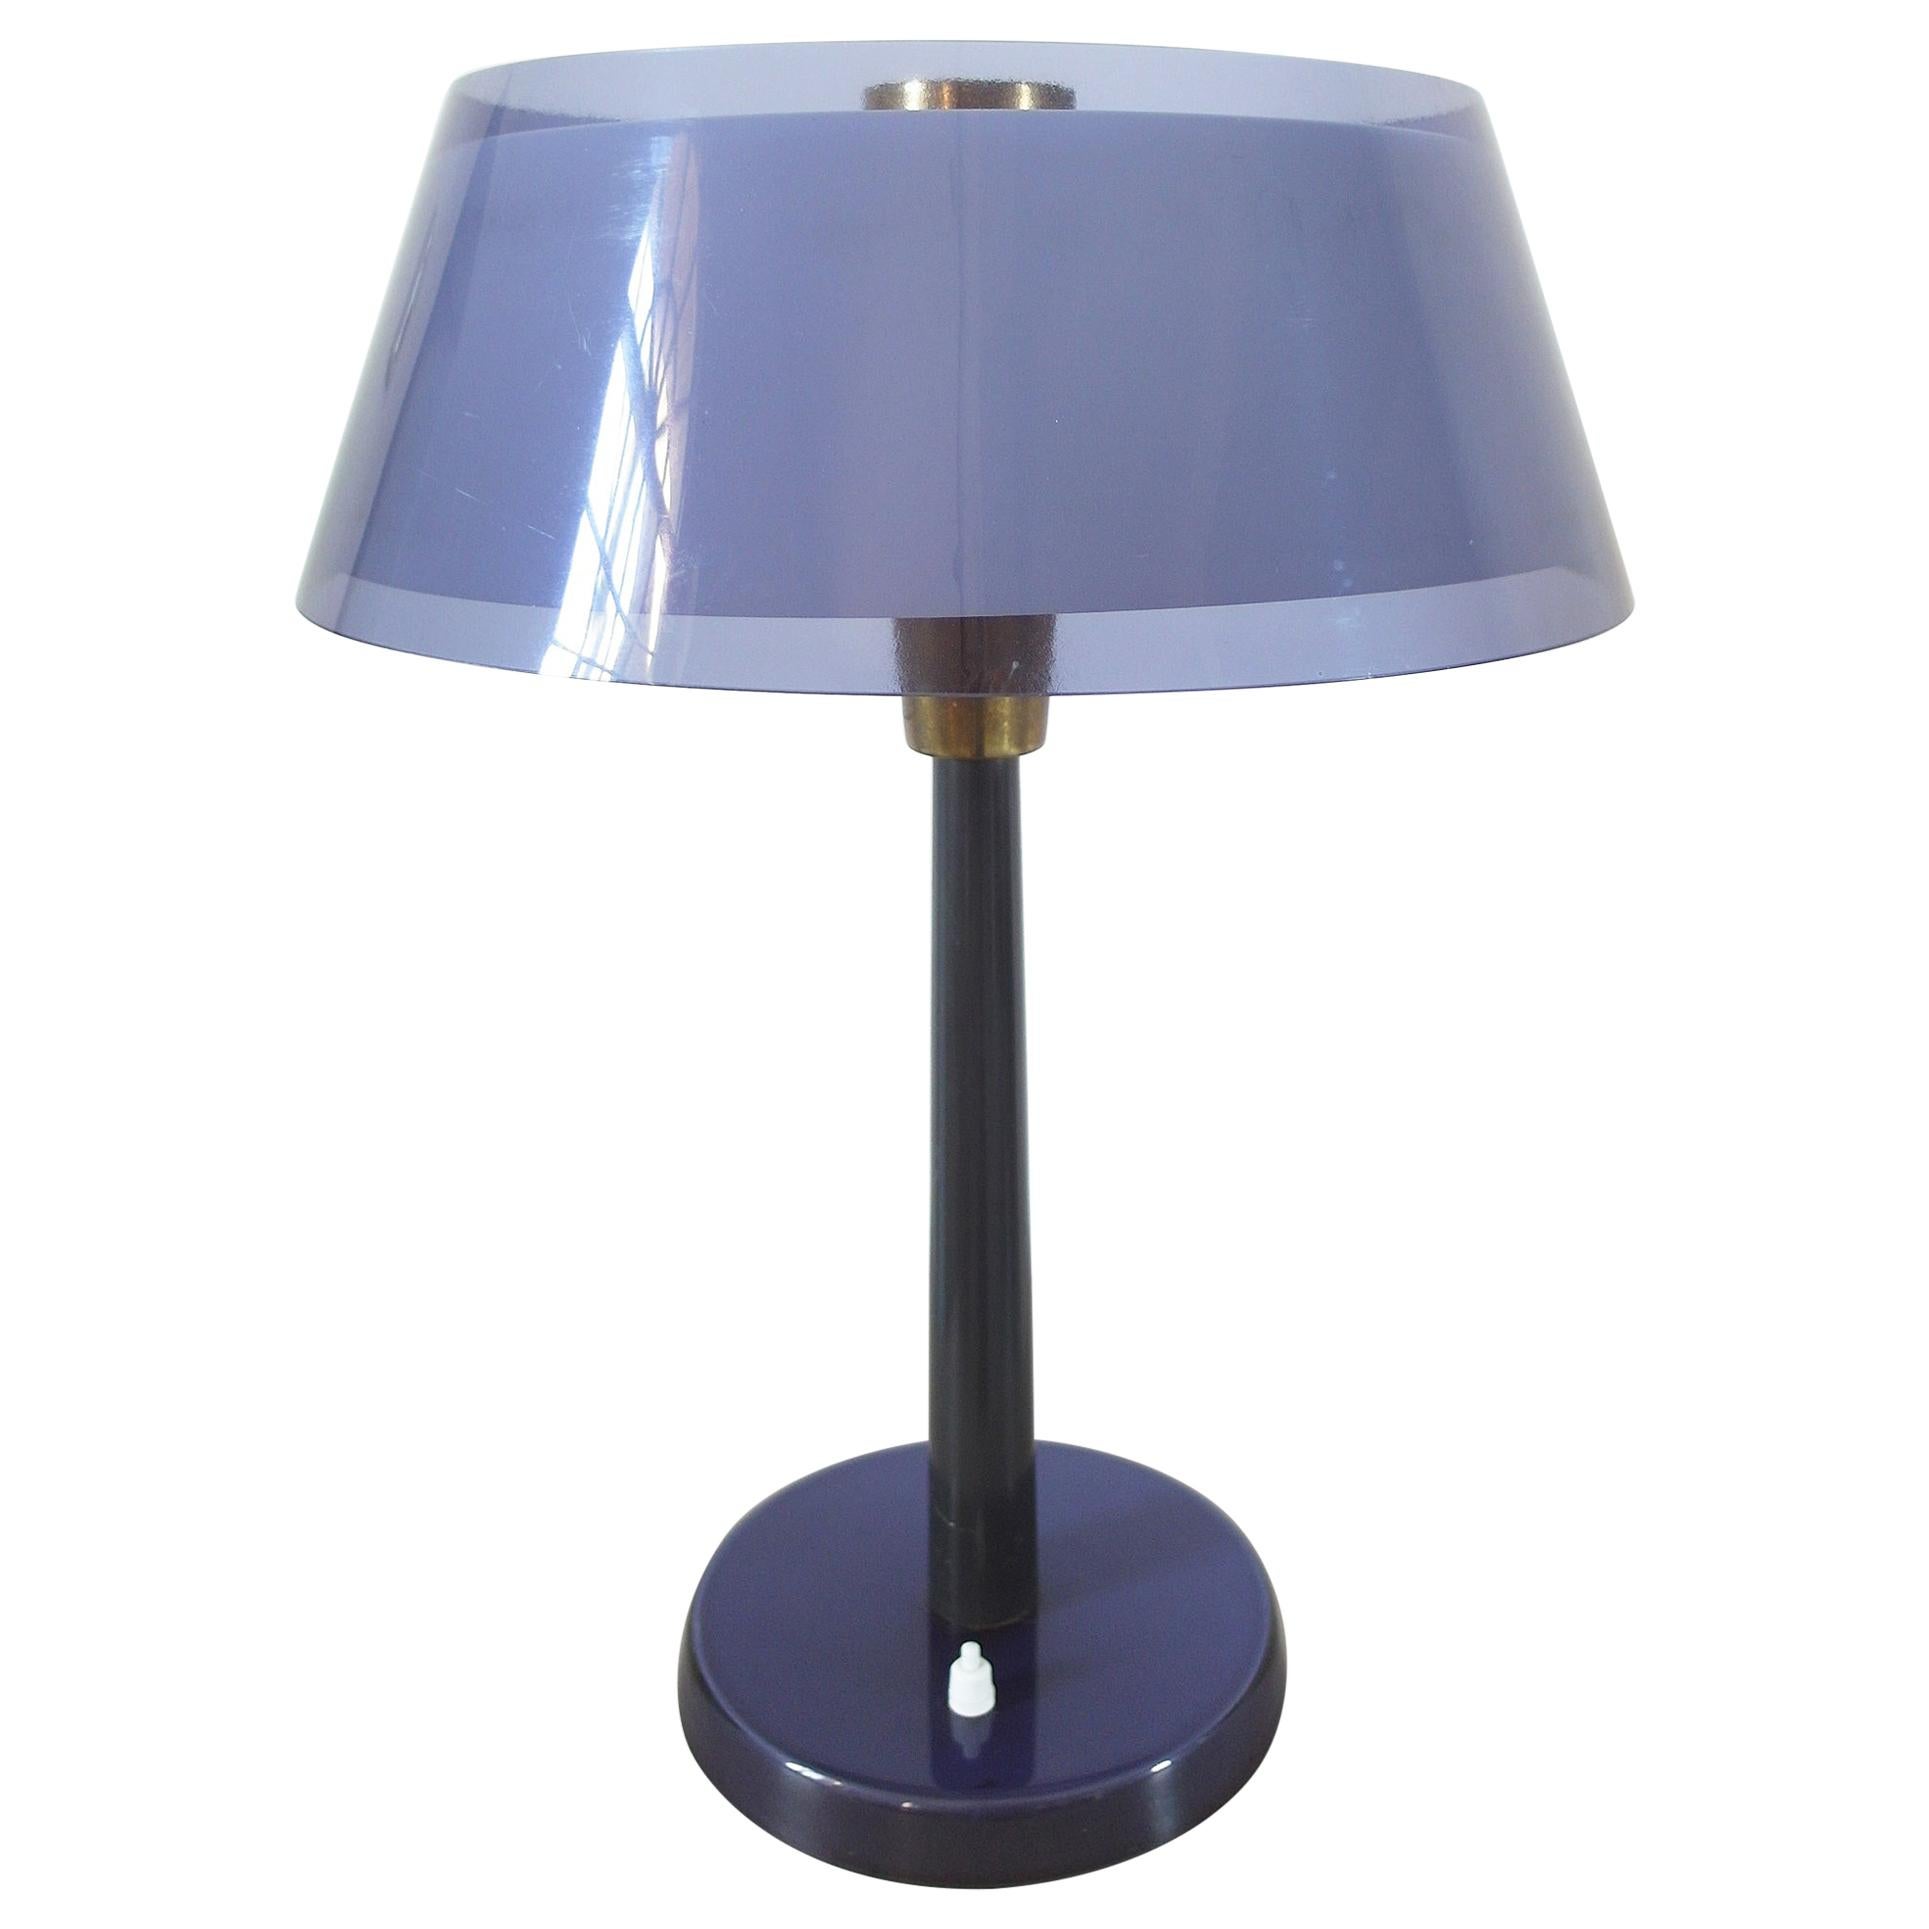 Purple Tuomas Table Light in by Yki Nummi for Stockmann-Orno, Finland, 1950s For Sale